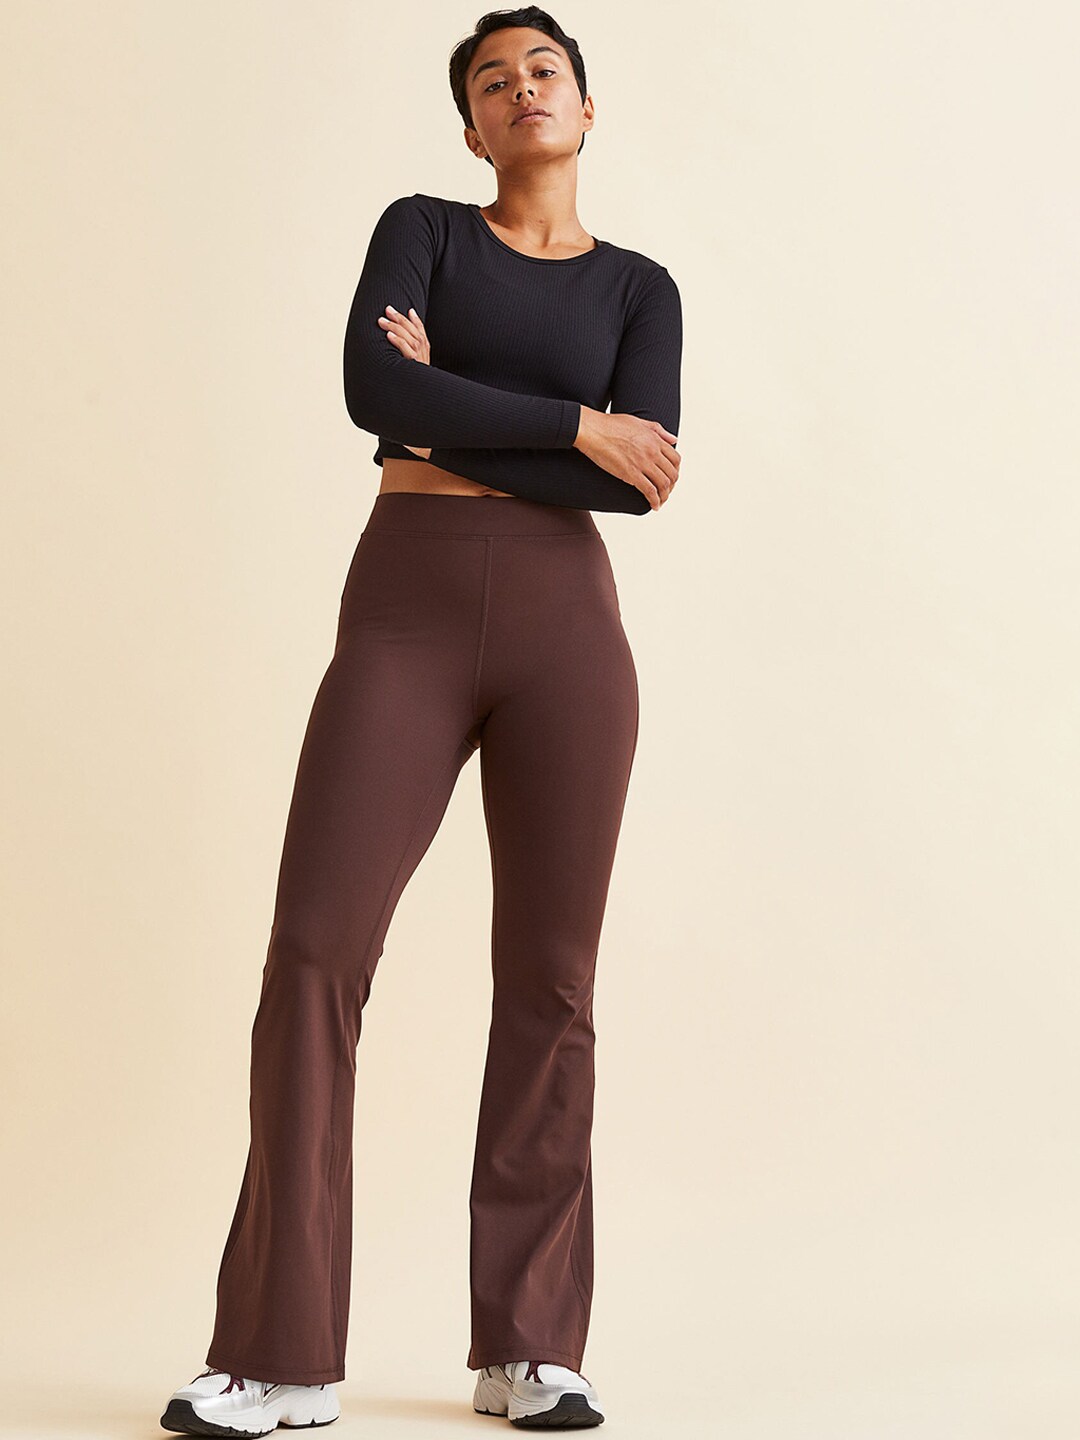 H&M Women High Waist Sports Tights Price in India